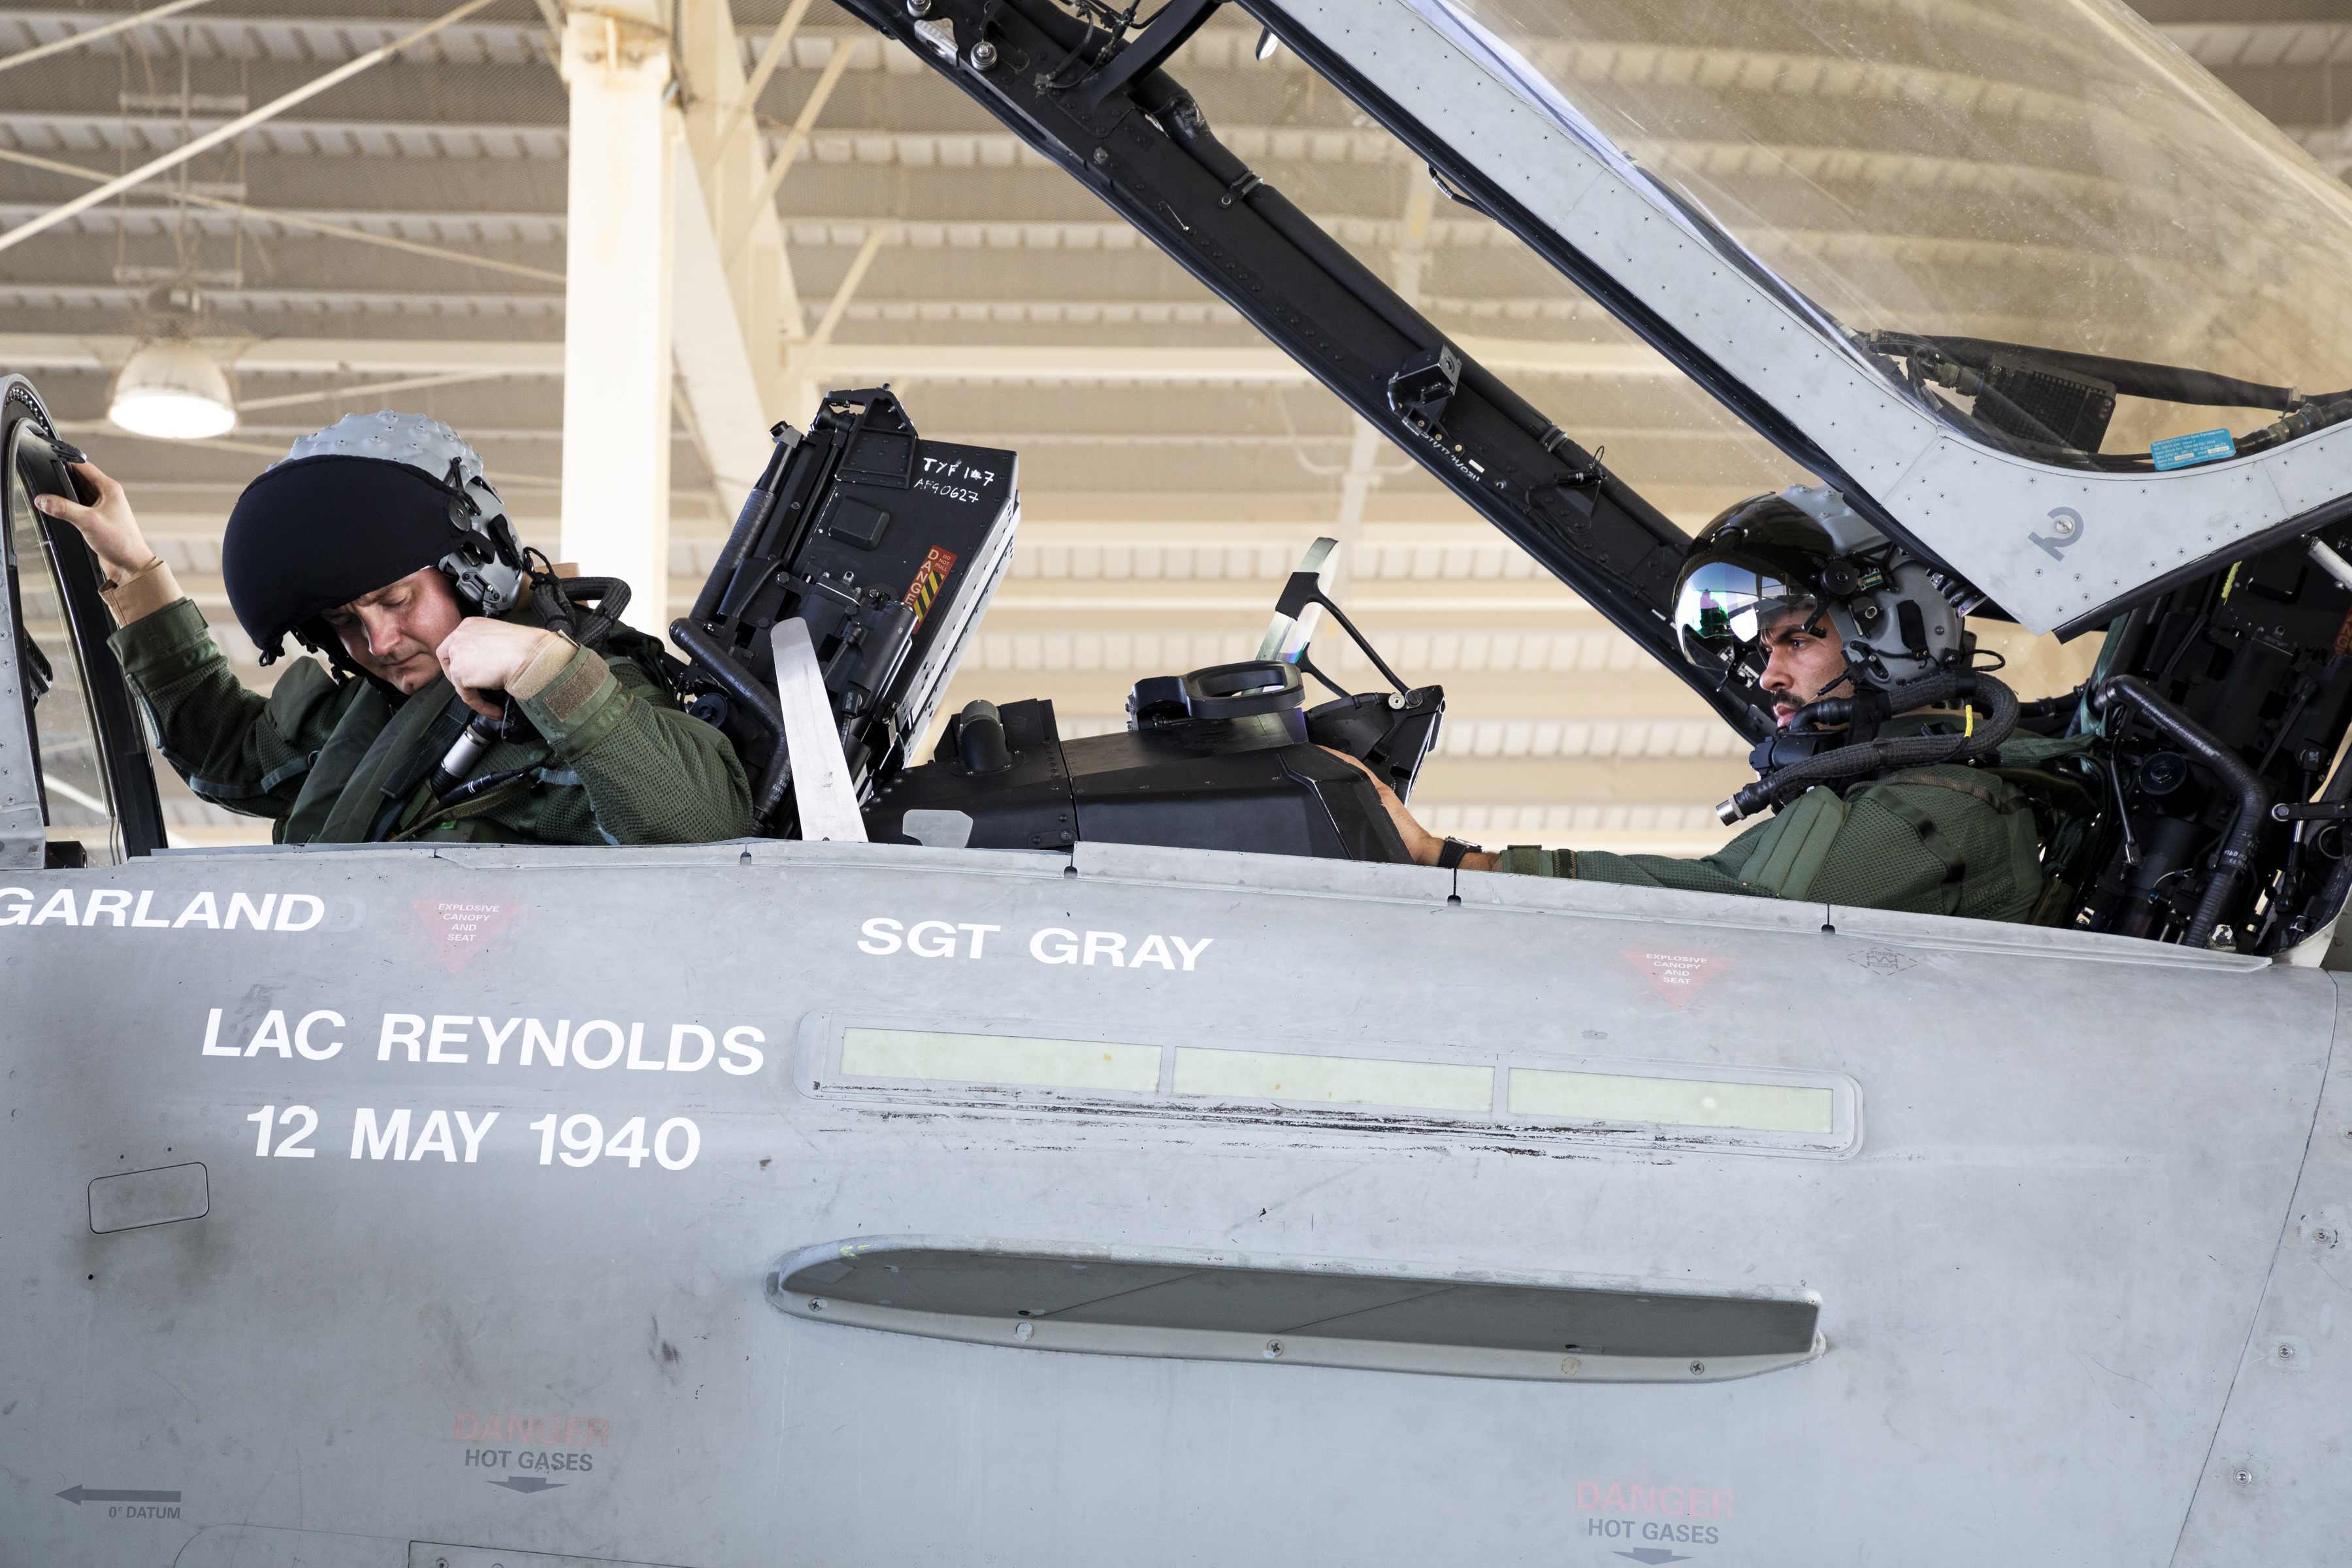 Image shows RAF Pilots in the cockpit of a Typhoon.